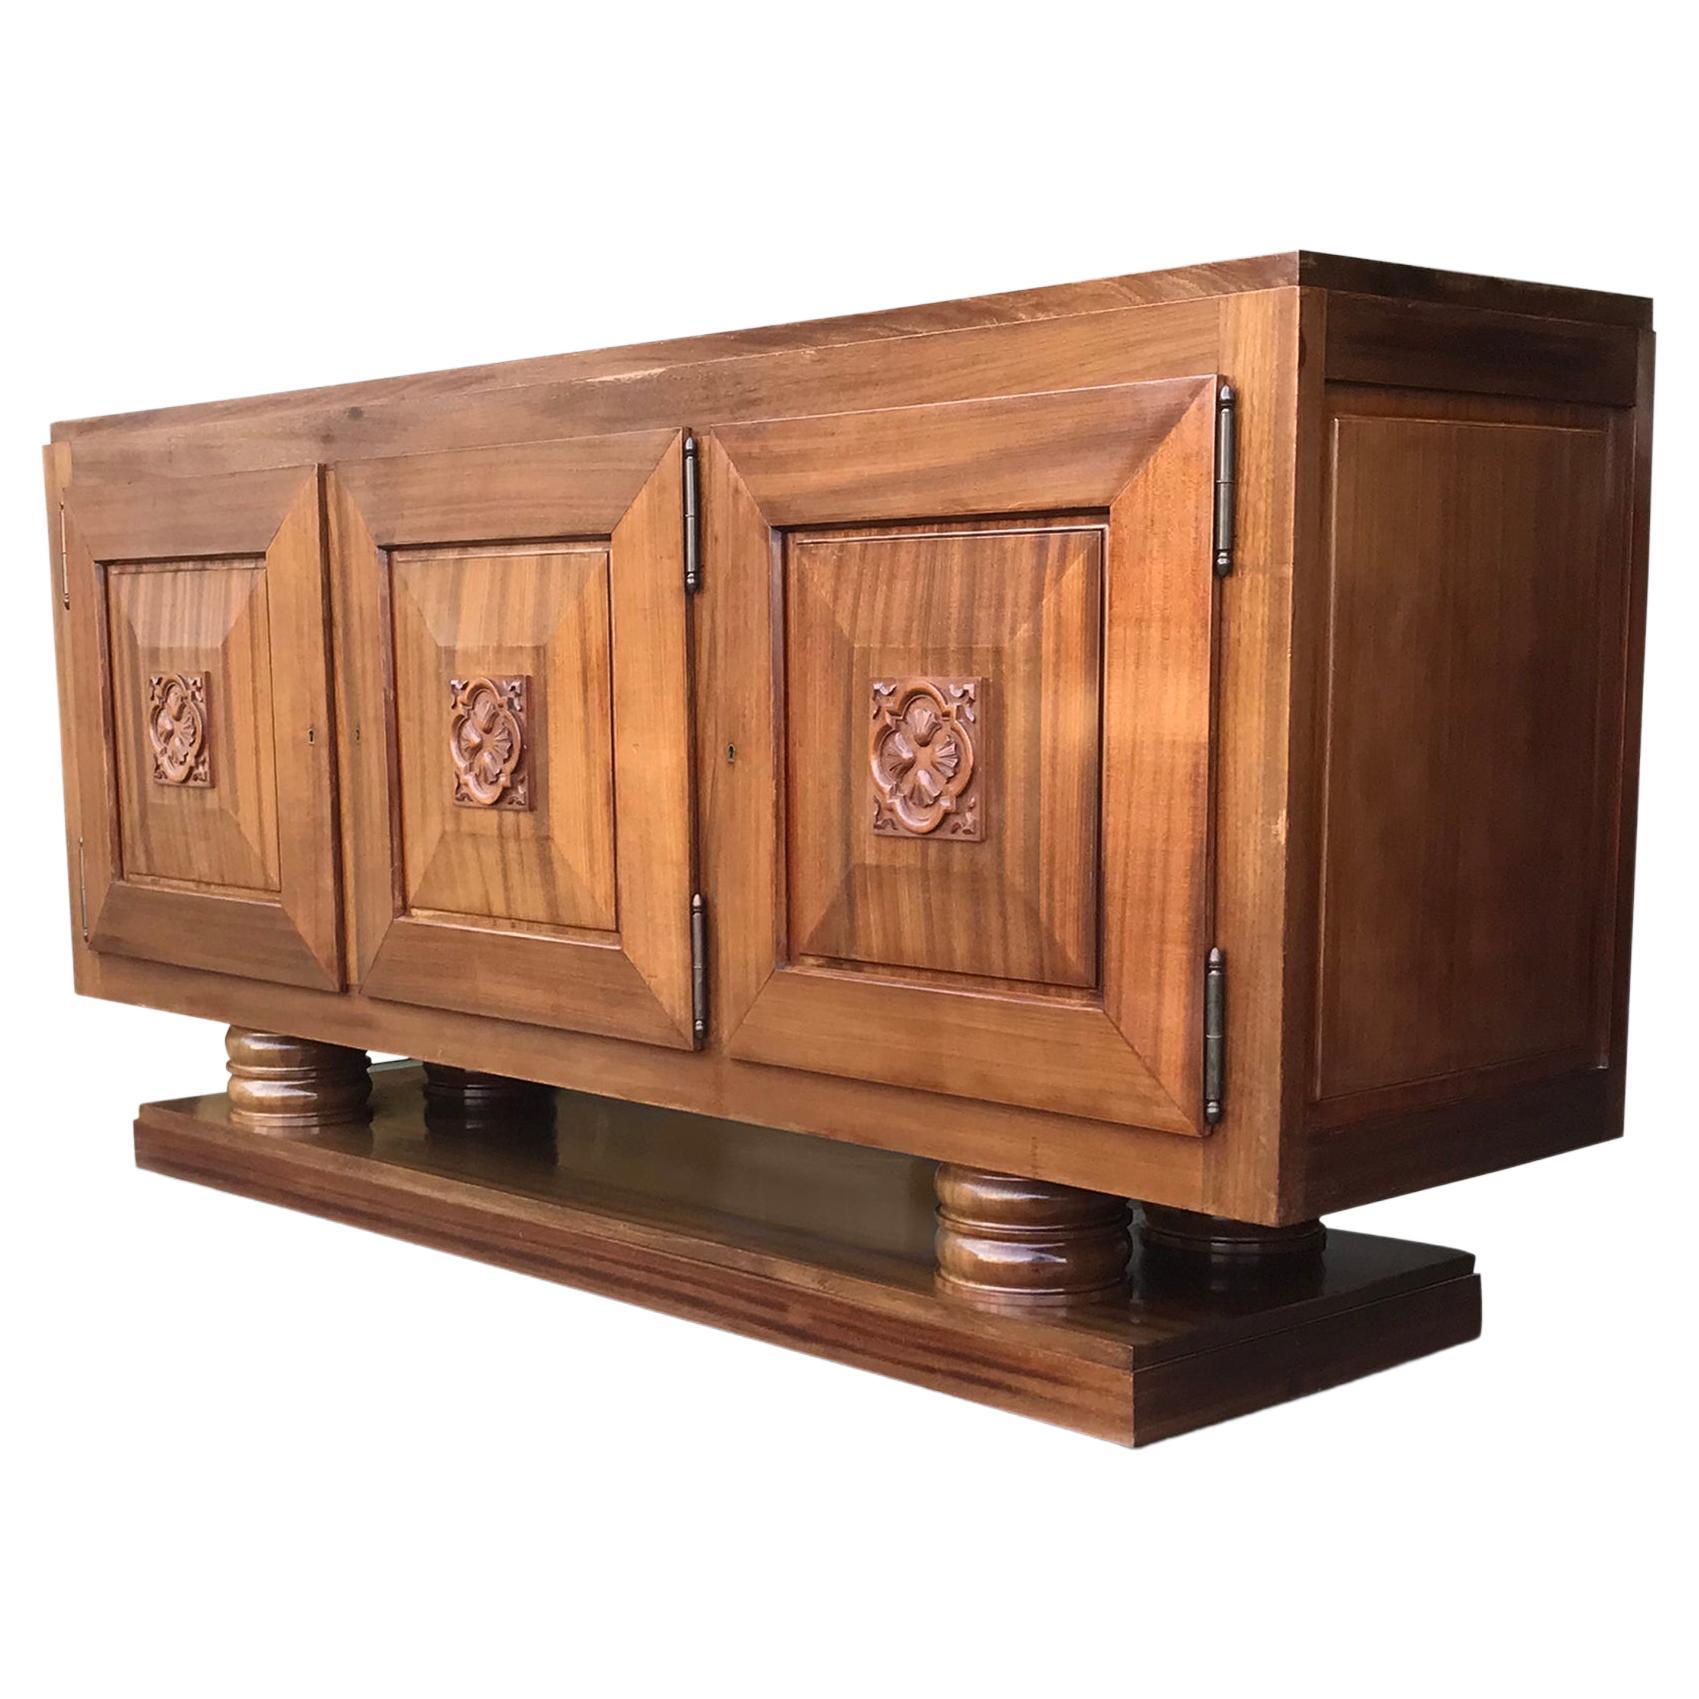 Sculpted Mahogany Art Deco Credenza by Gaston Poisson, France, 1930s For Sale